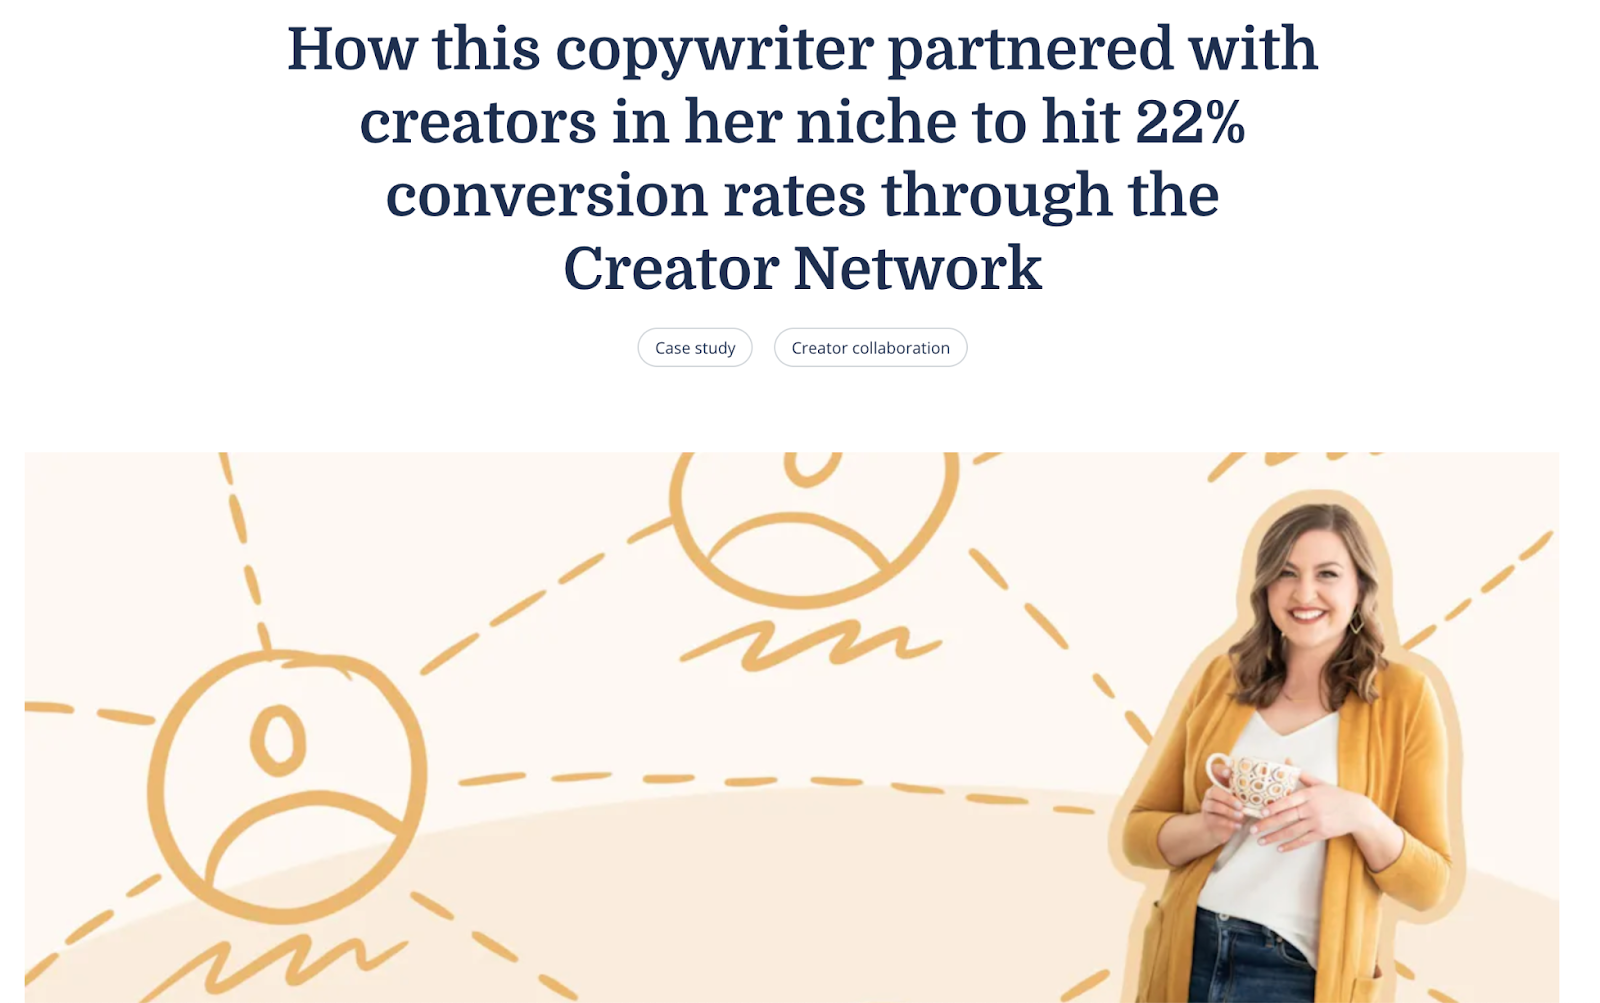 How this copywriter partnered with creators in her niche to hit 22% conversion rates through the Creator Network graphic